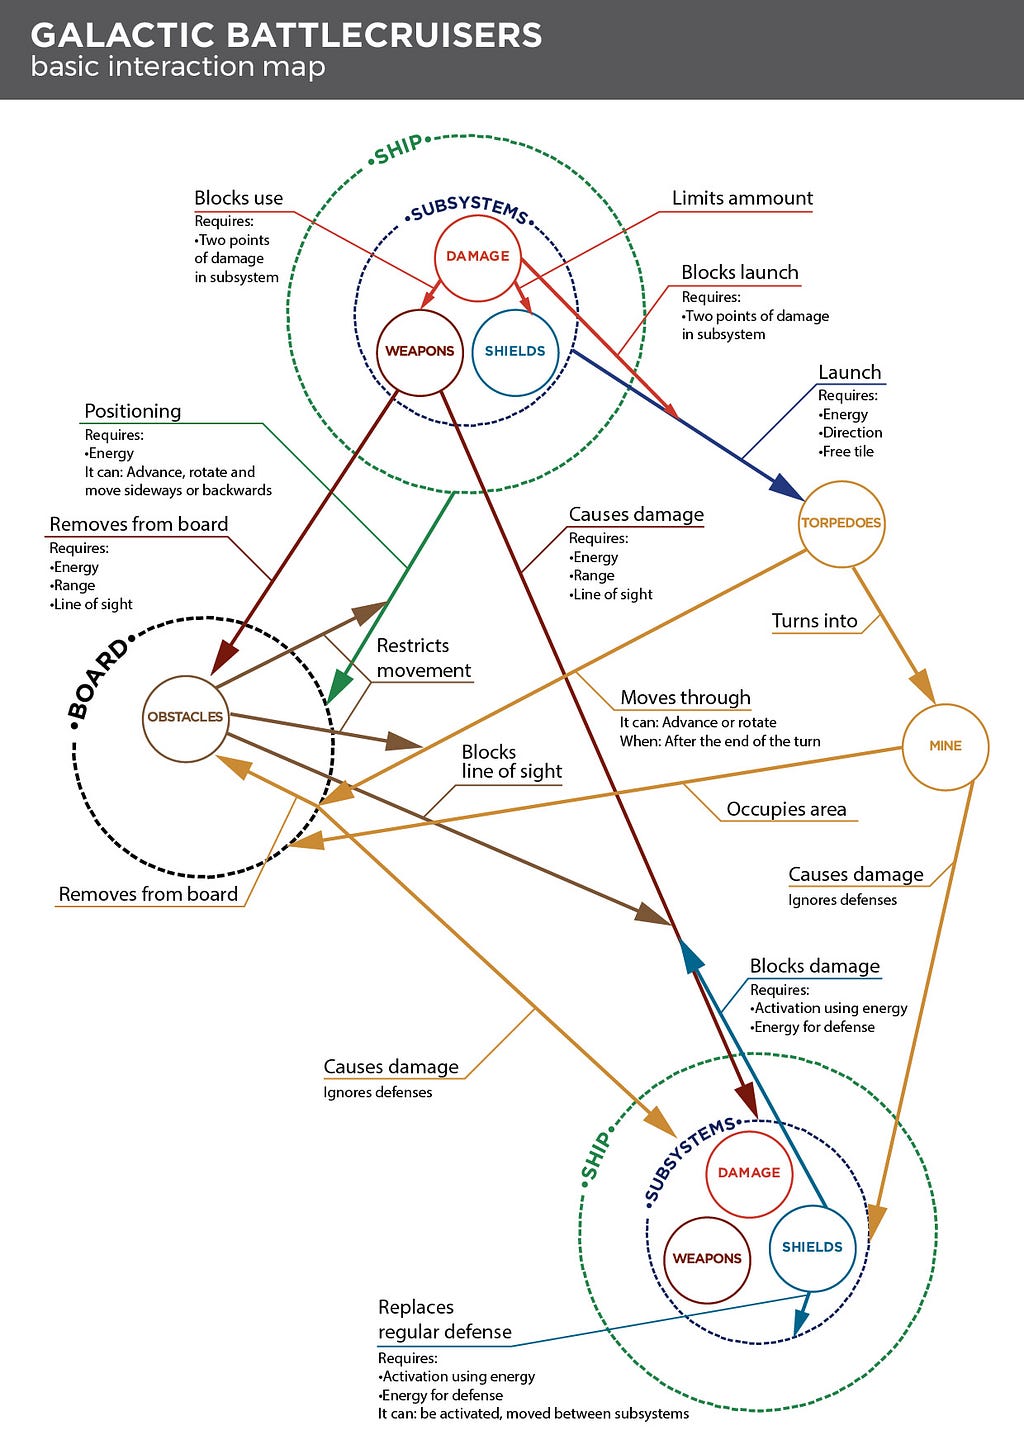 A map describing the connections between the diferent game components and the way they interact.